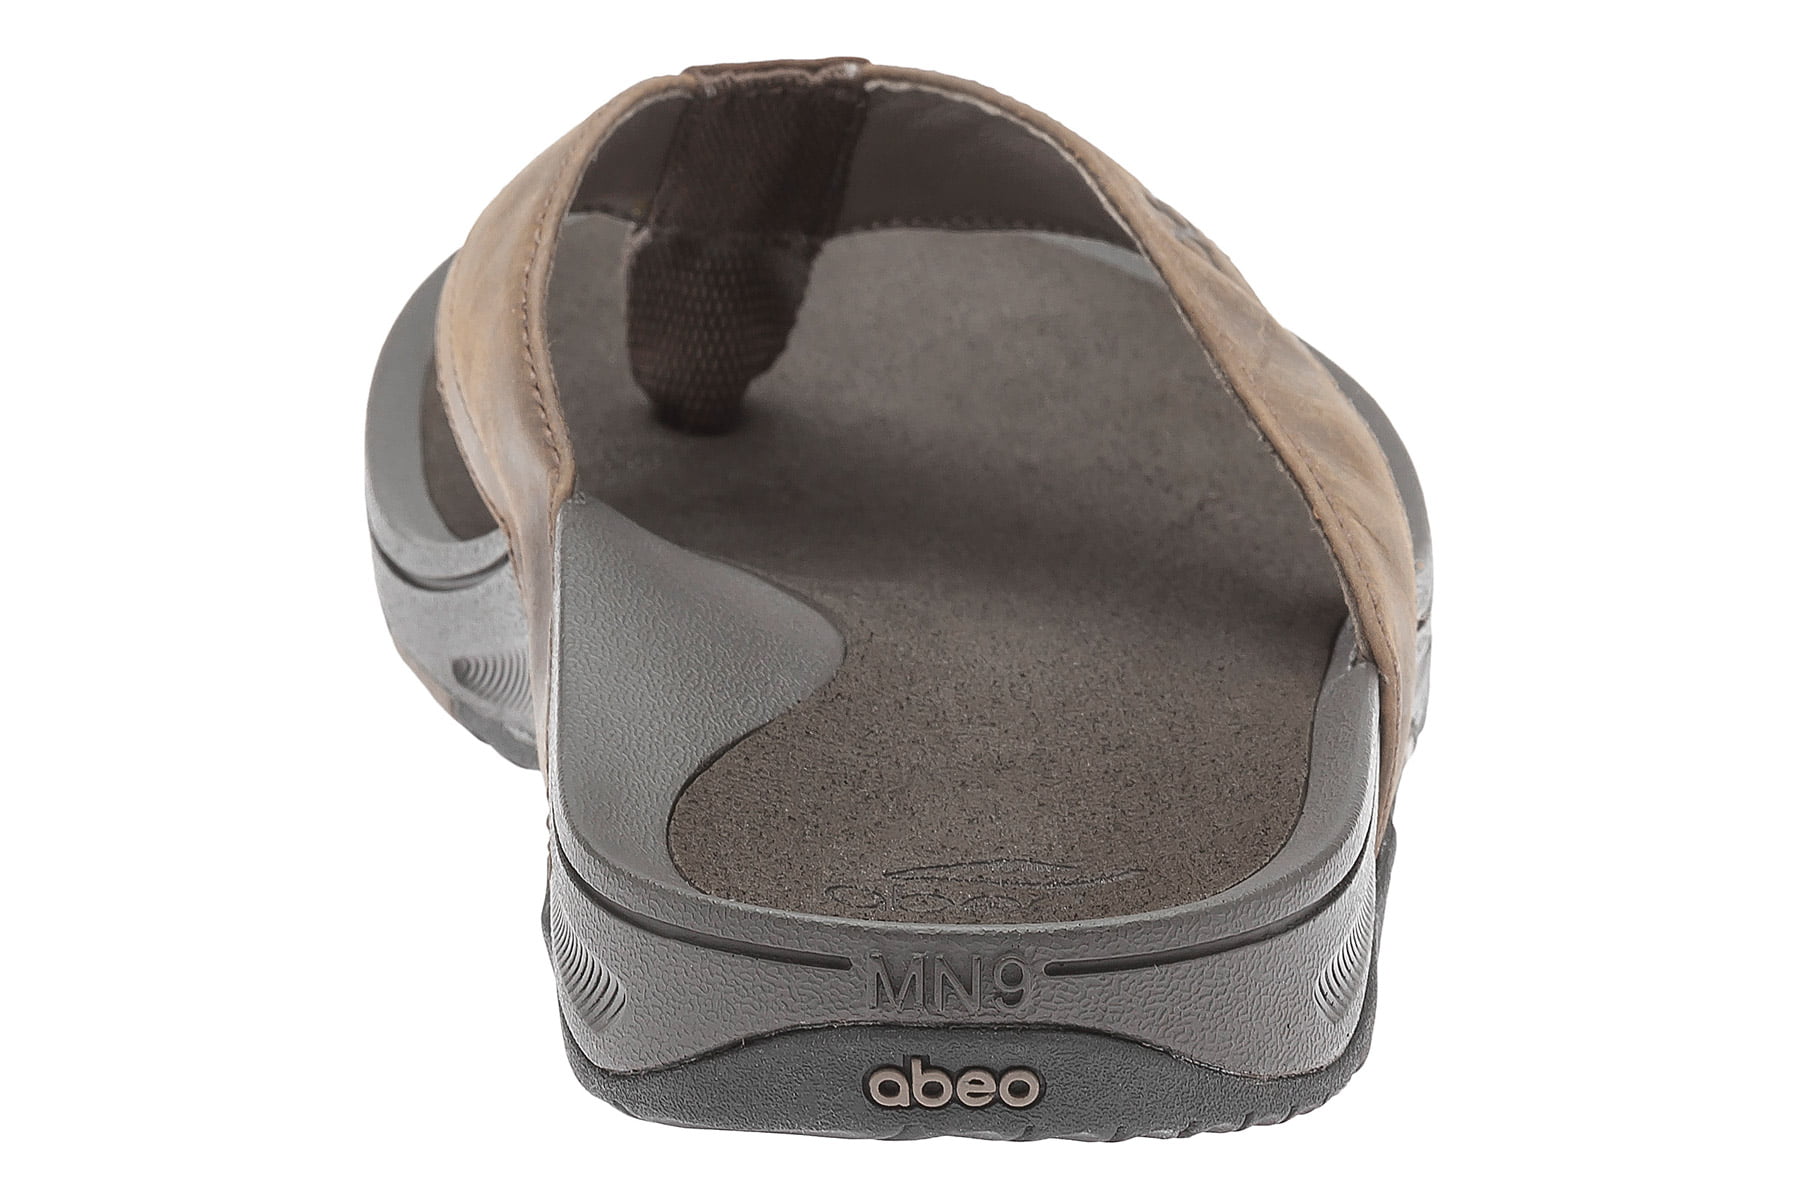 abeo mens slippers